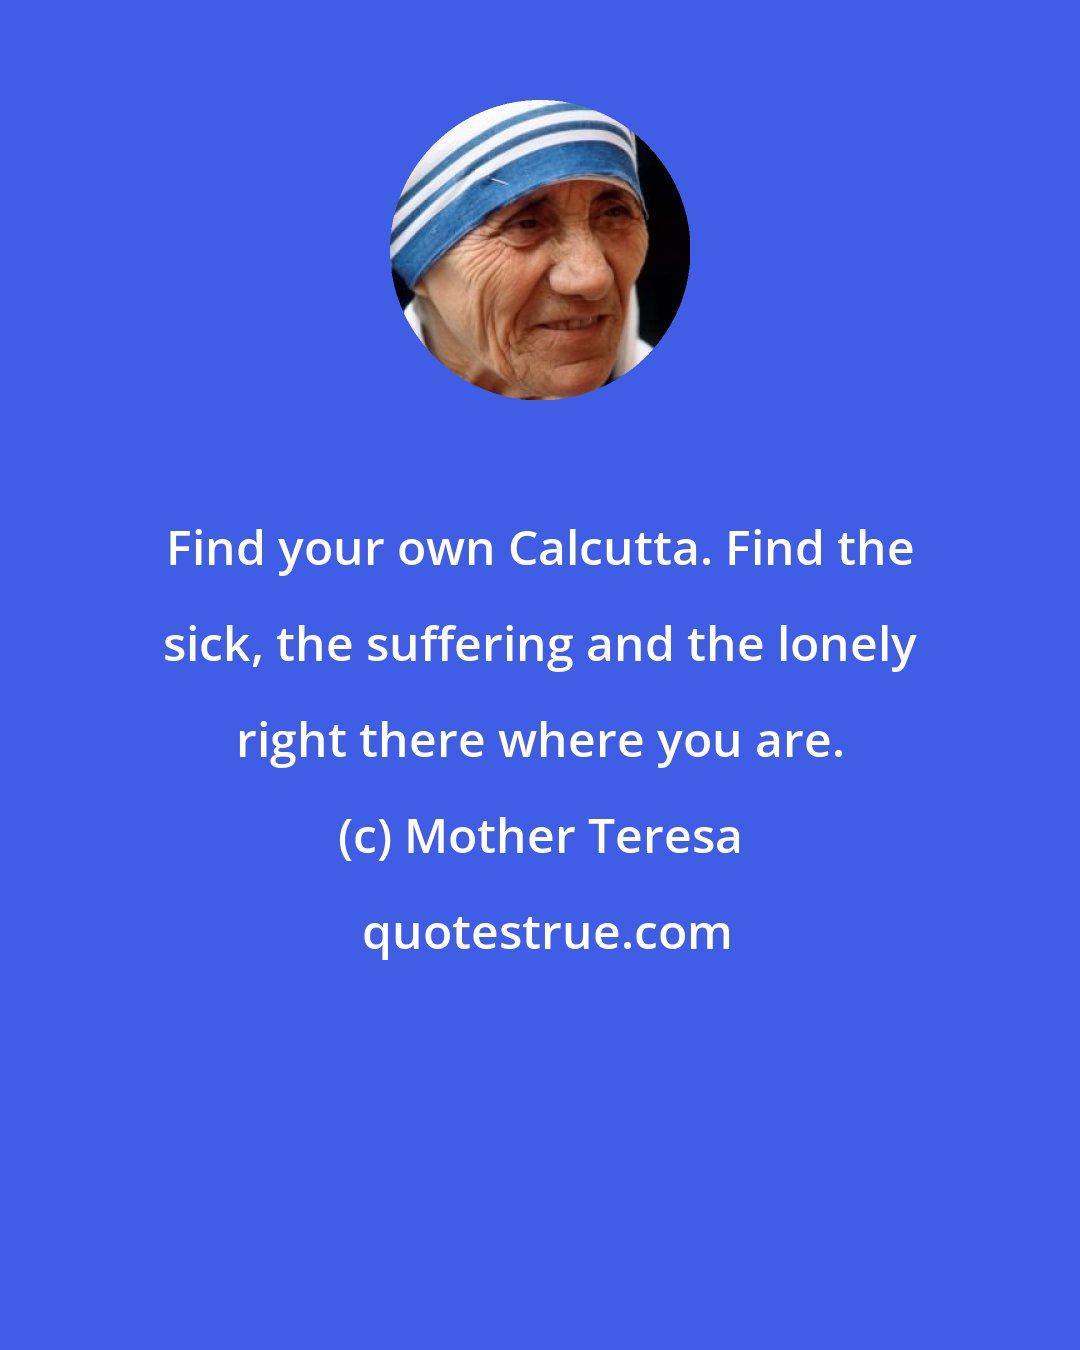 Mother Teresa: Find your own Calcutta. Find the sick, the suffering and the lonely right there where you are.